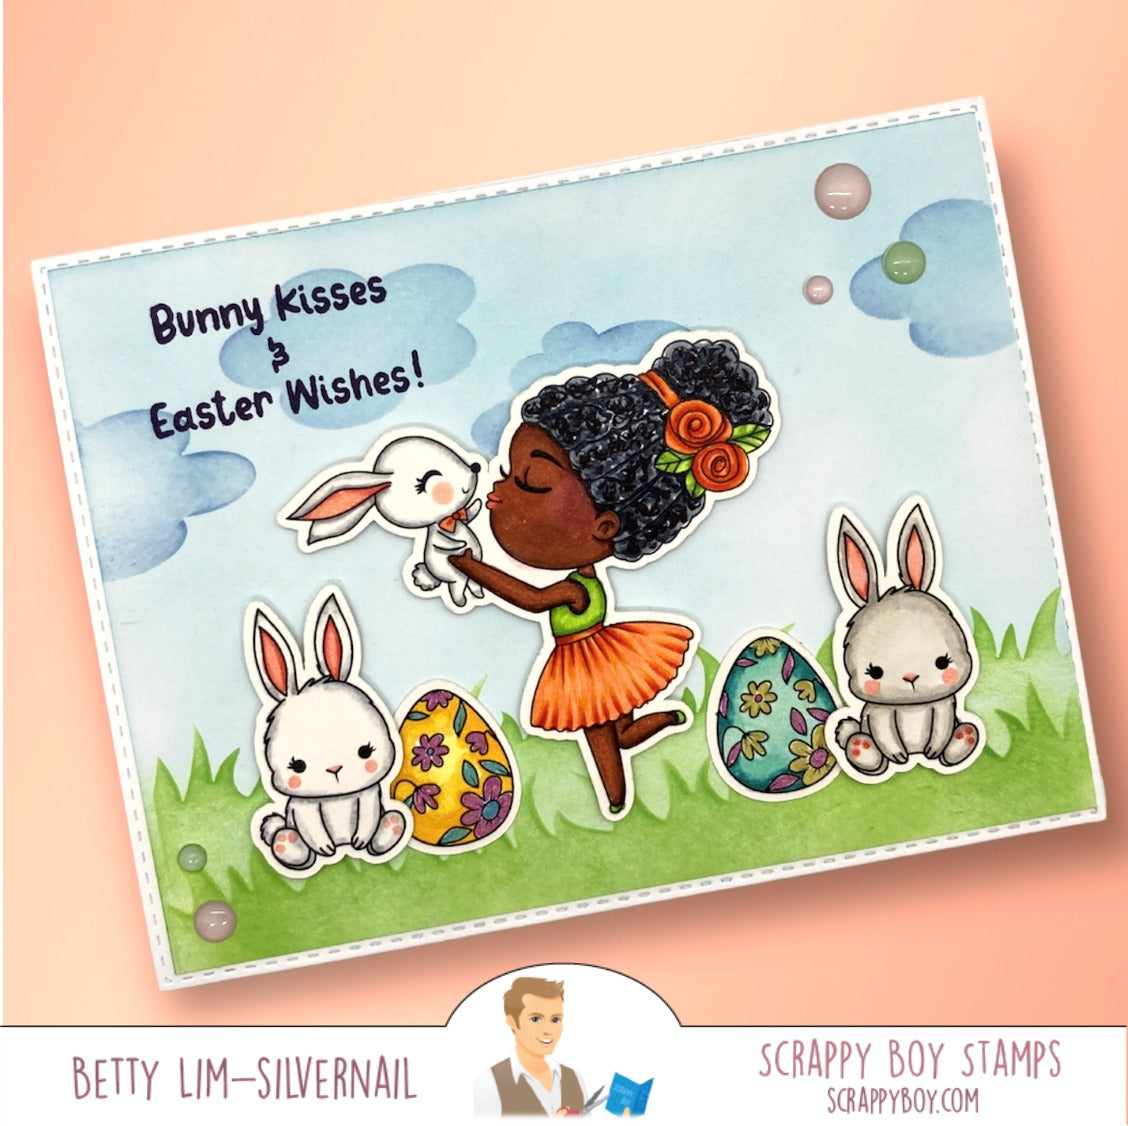 
                  
                    Cute Girls Easter - 6x8 Stamp Set Scrappy Boy Stamps
                  
                